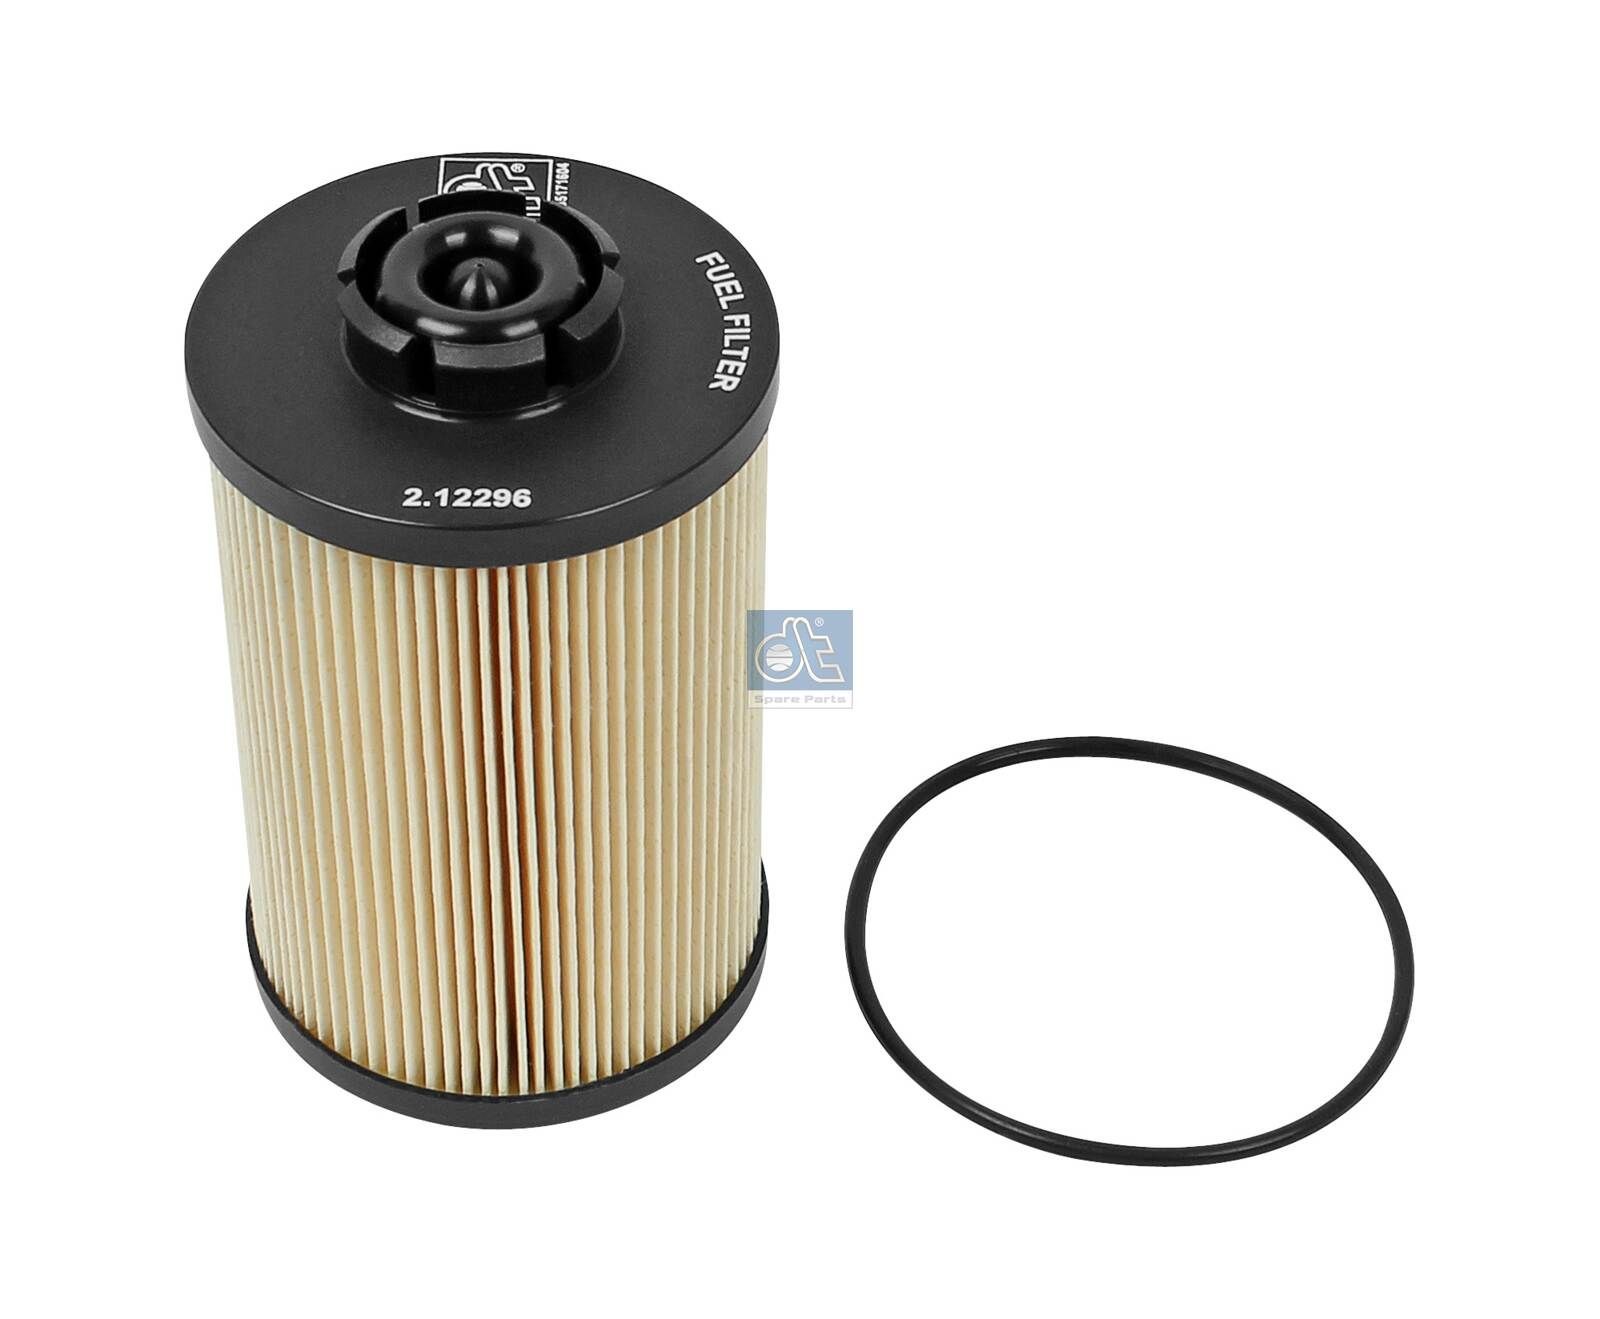 PU 1058X DT Spare Parts 2.12296 Fuel filter 2099 8805